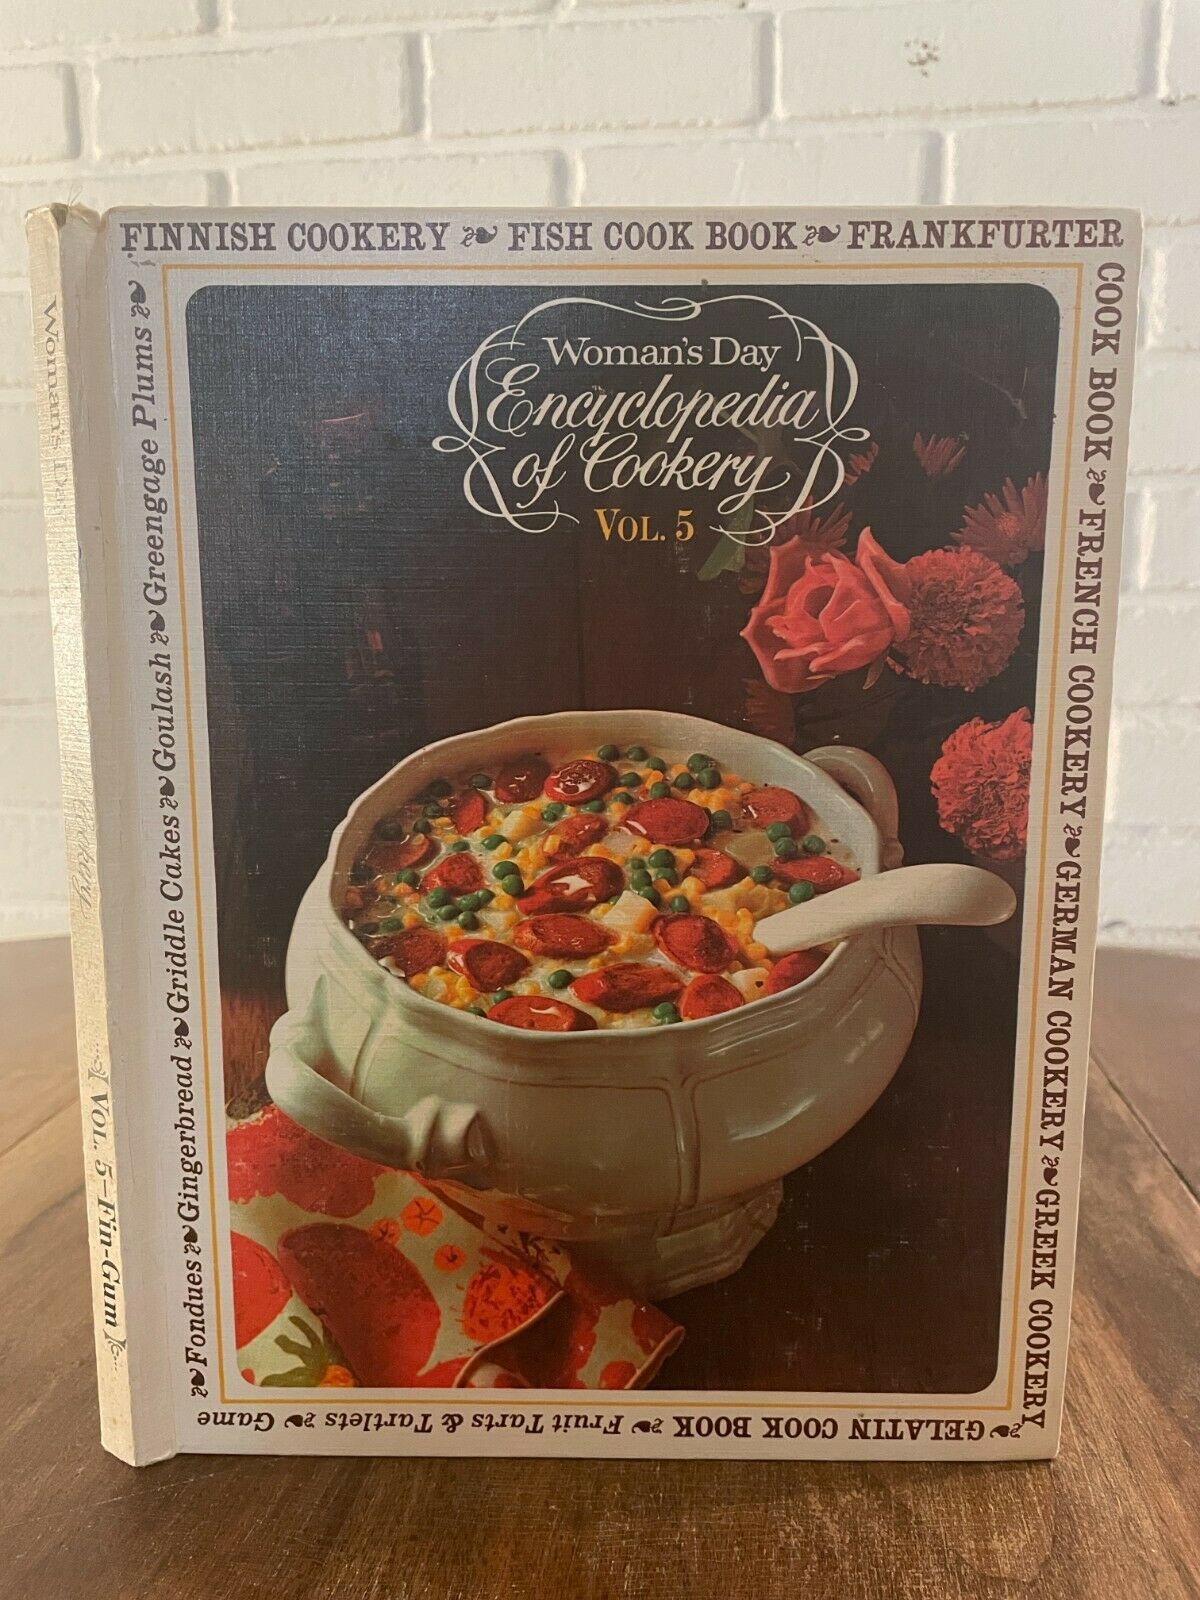 Woman's Day Encyclopedia of Cookery (Vol. 5 - Fin - Gum) 1966 Hardcover